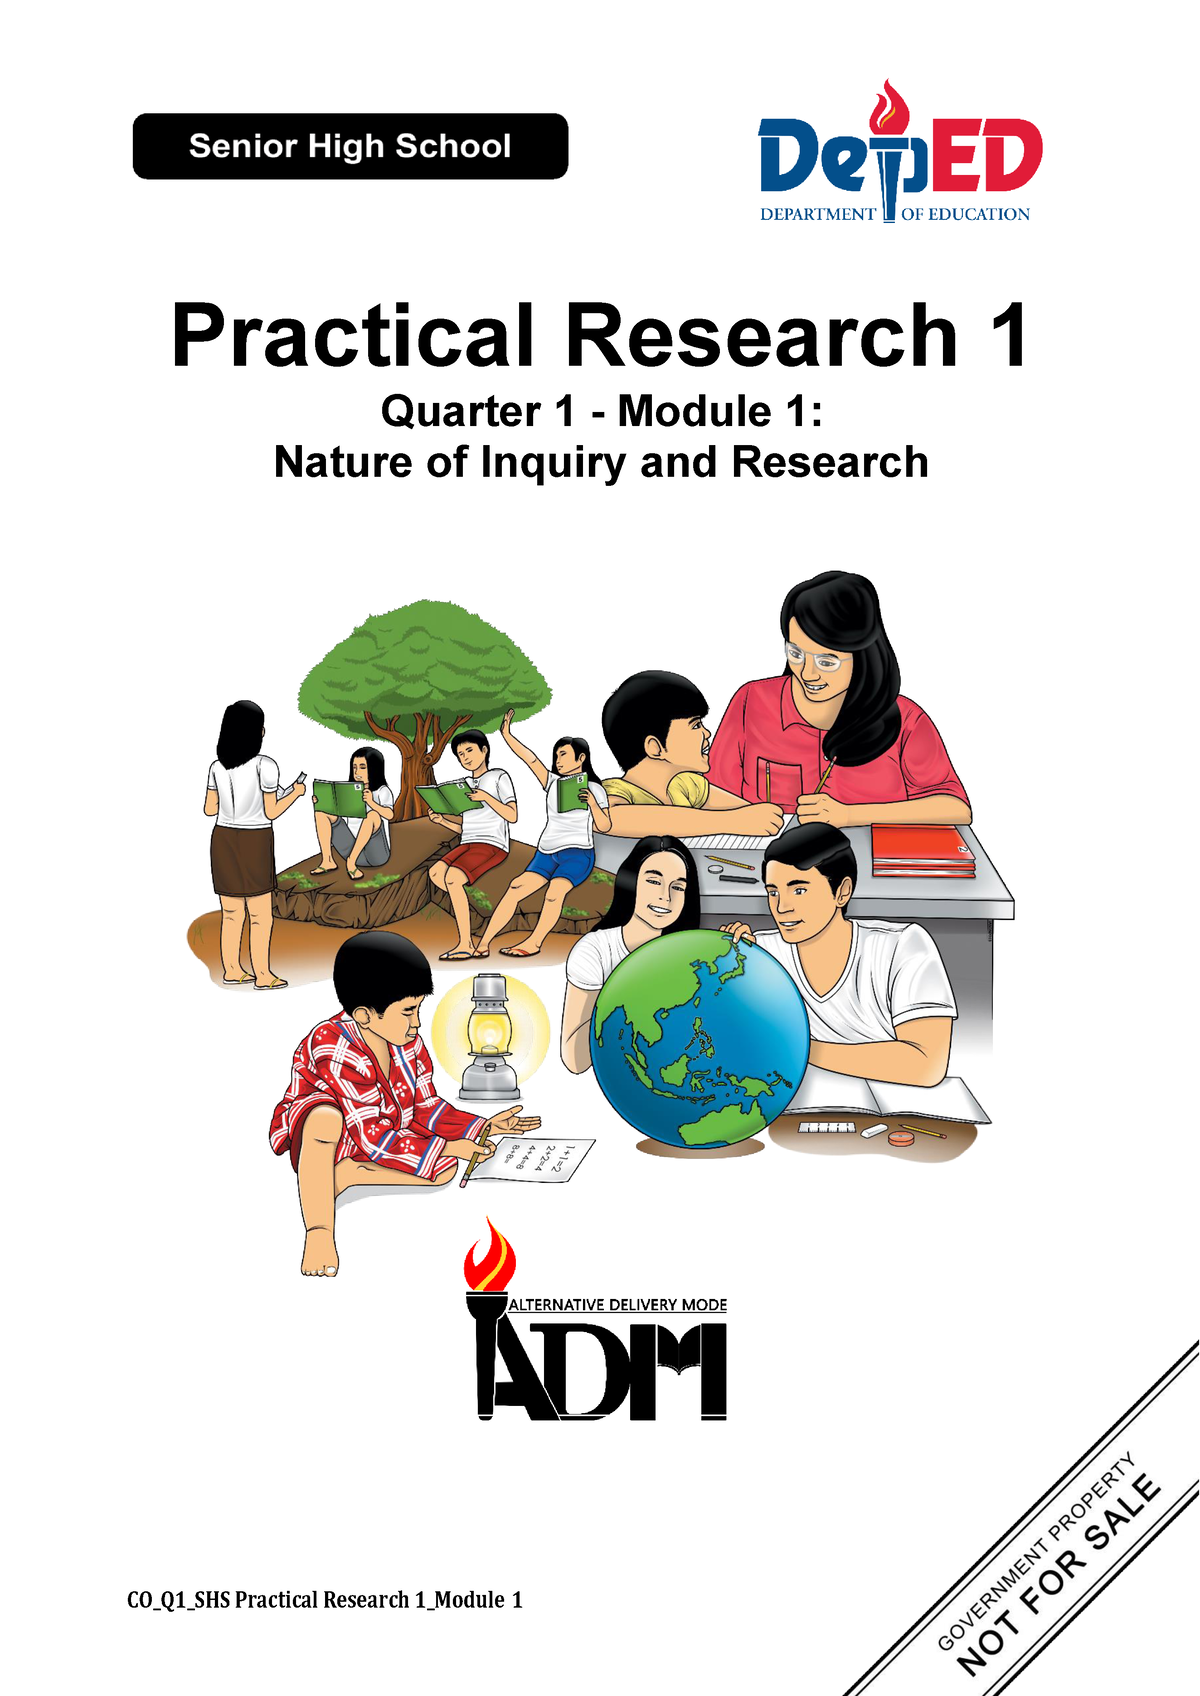 case study in practical research 1